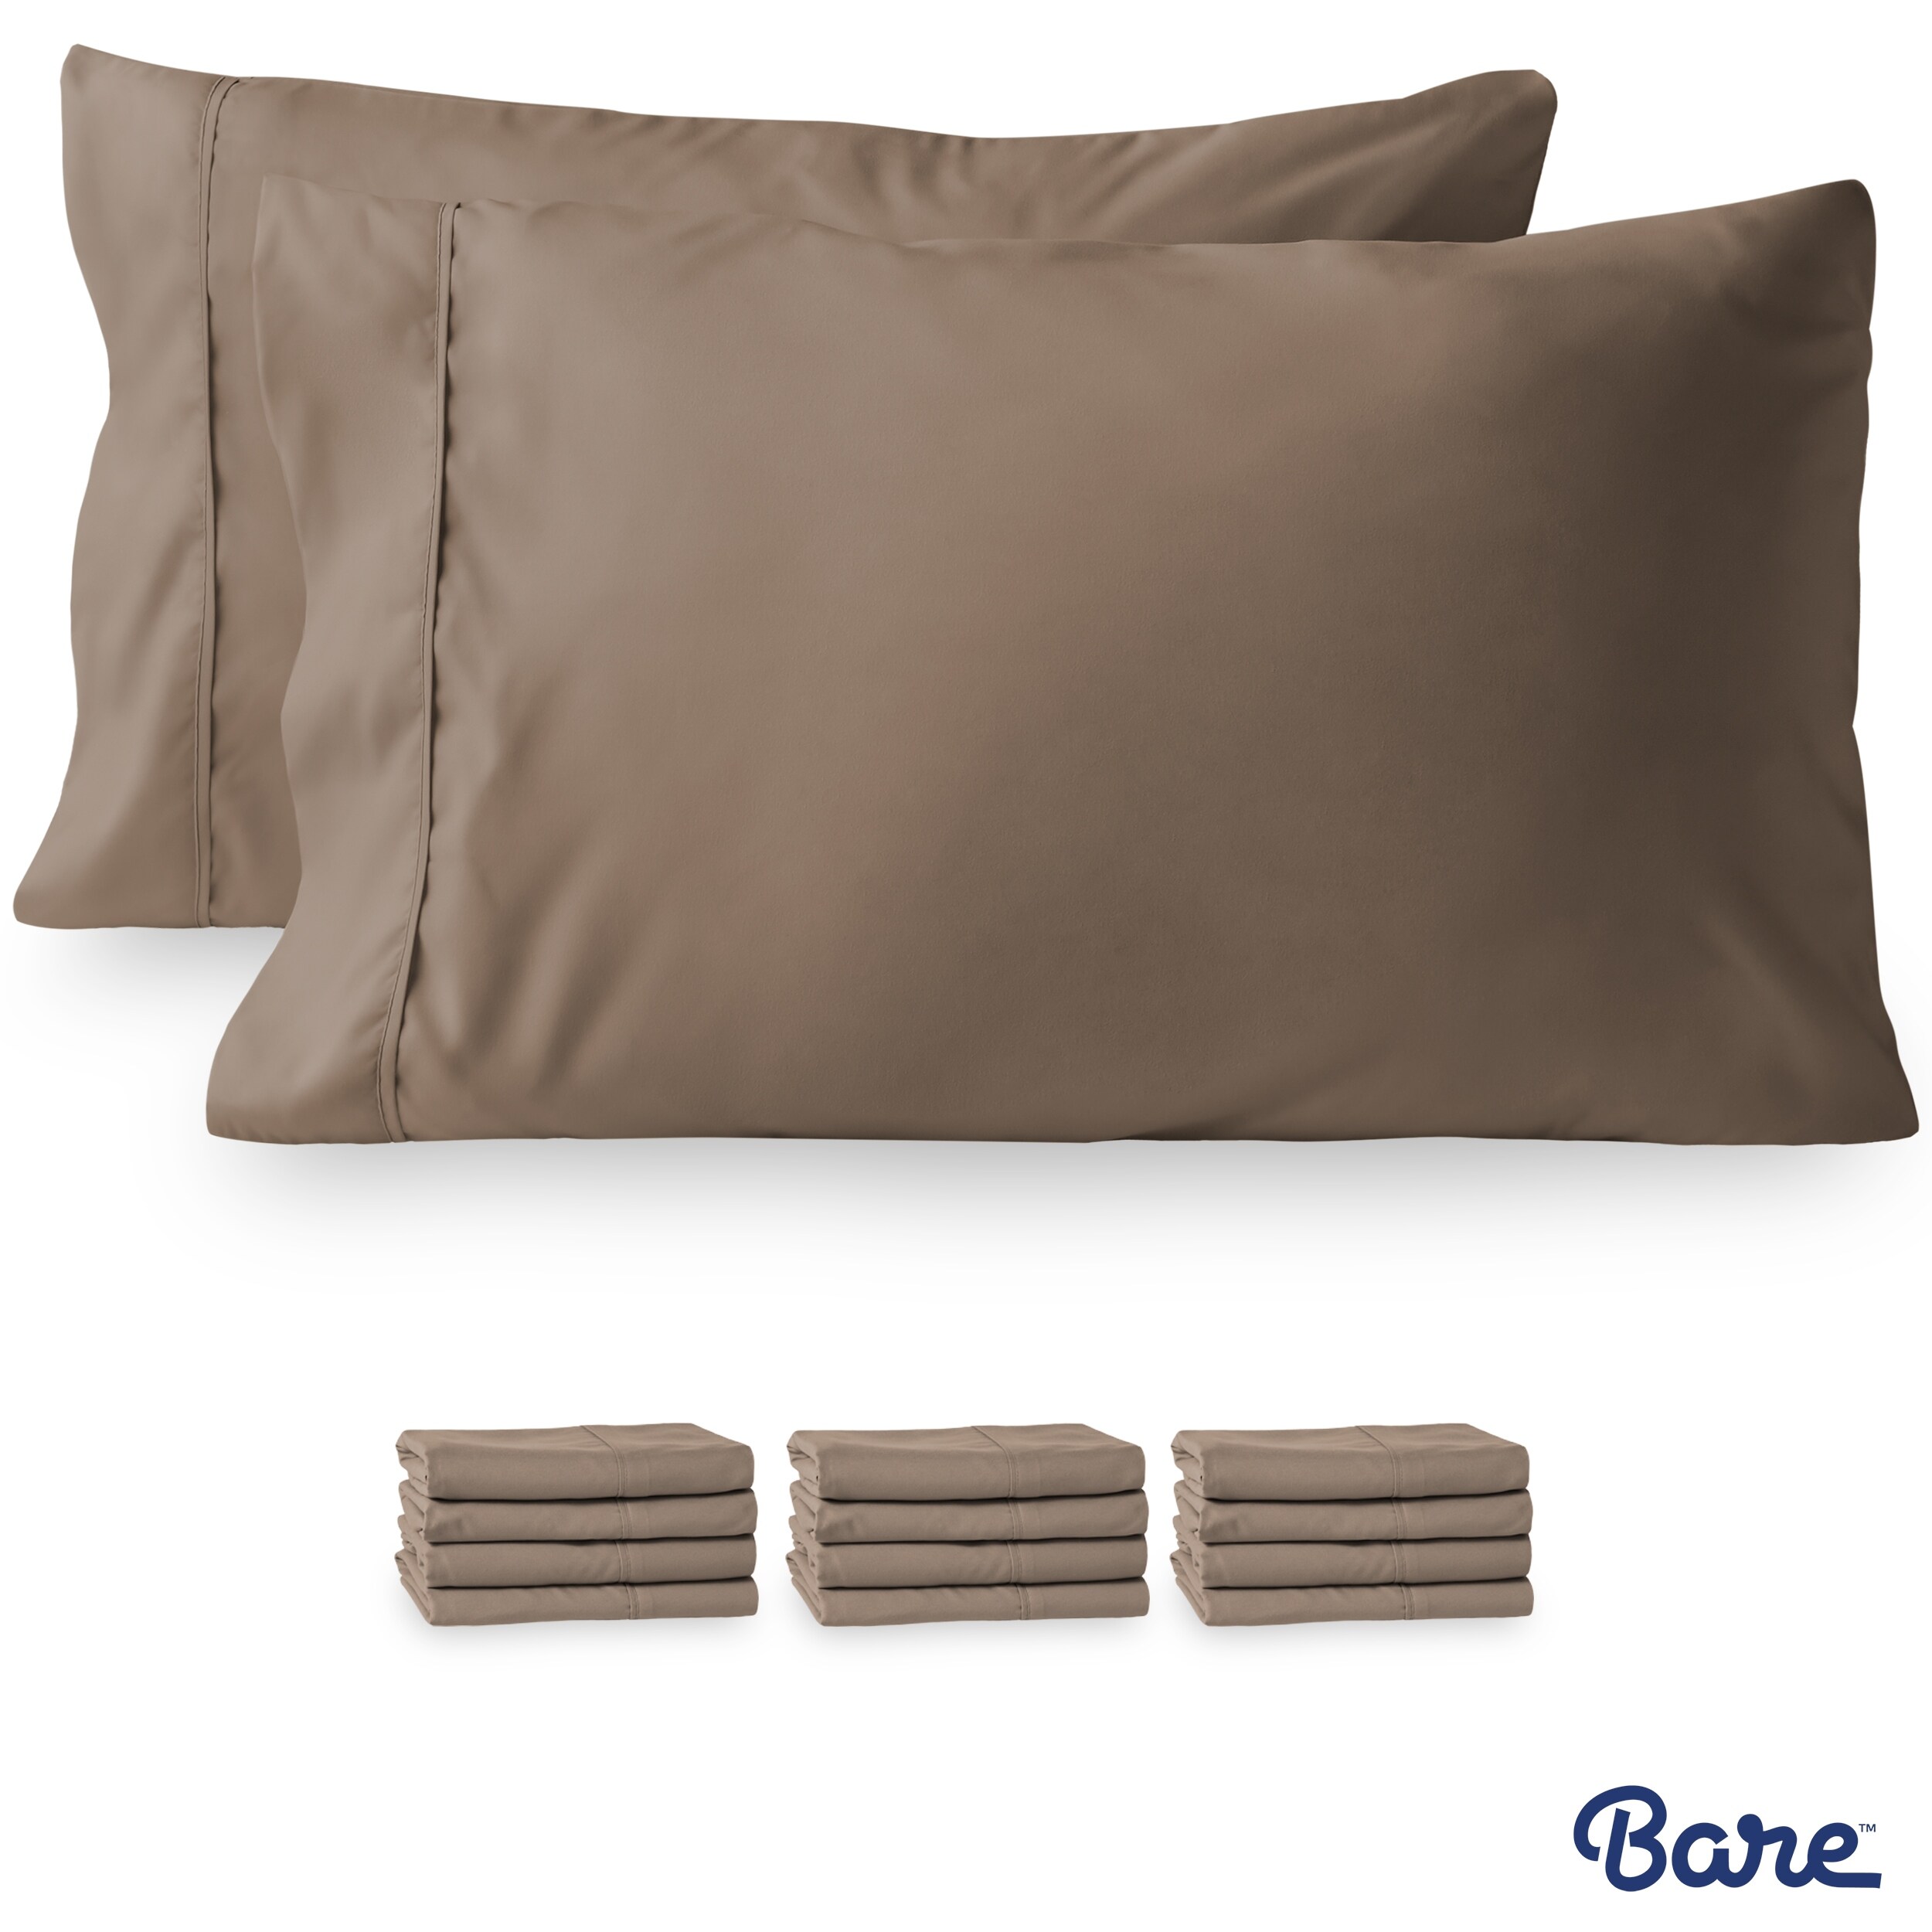 https://ak1.ostkcdn.com/images/products/is/images/direct/1fcaf635bf0b7af38452ea09bc6aa1e4acabea05/Bare-Home-Wholesale-Bulk-Pack-Microfiber-Pillowcases-Hypoallergenic.jpg